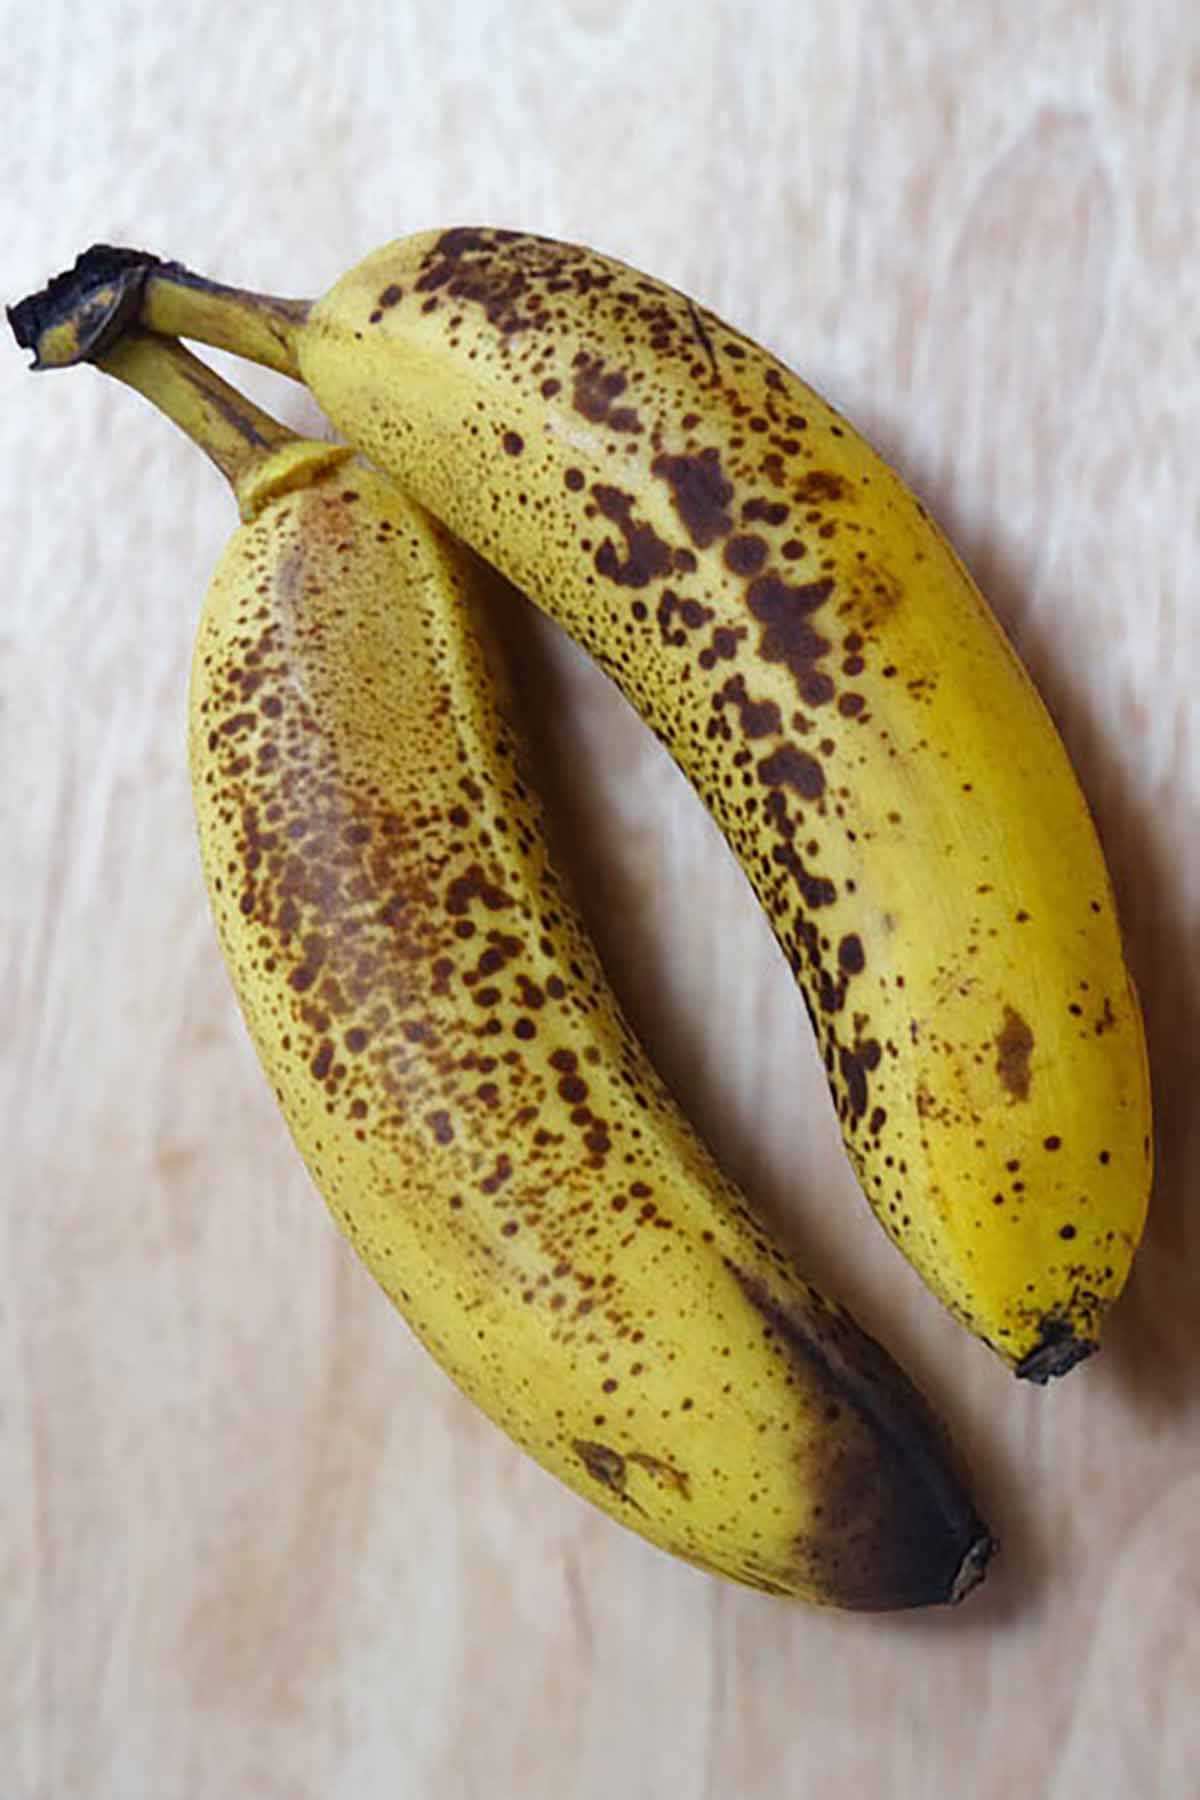 Two Bananas With Brown Spots On Them